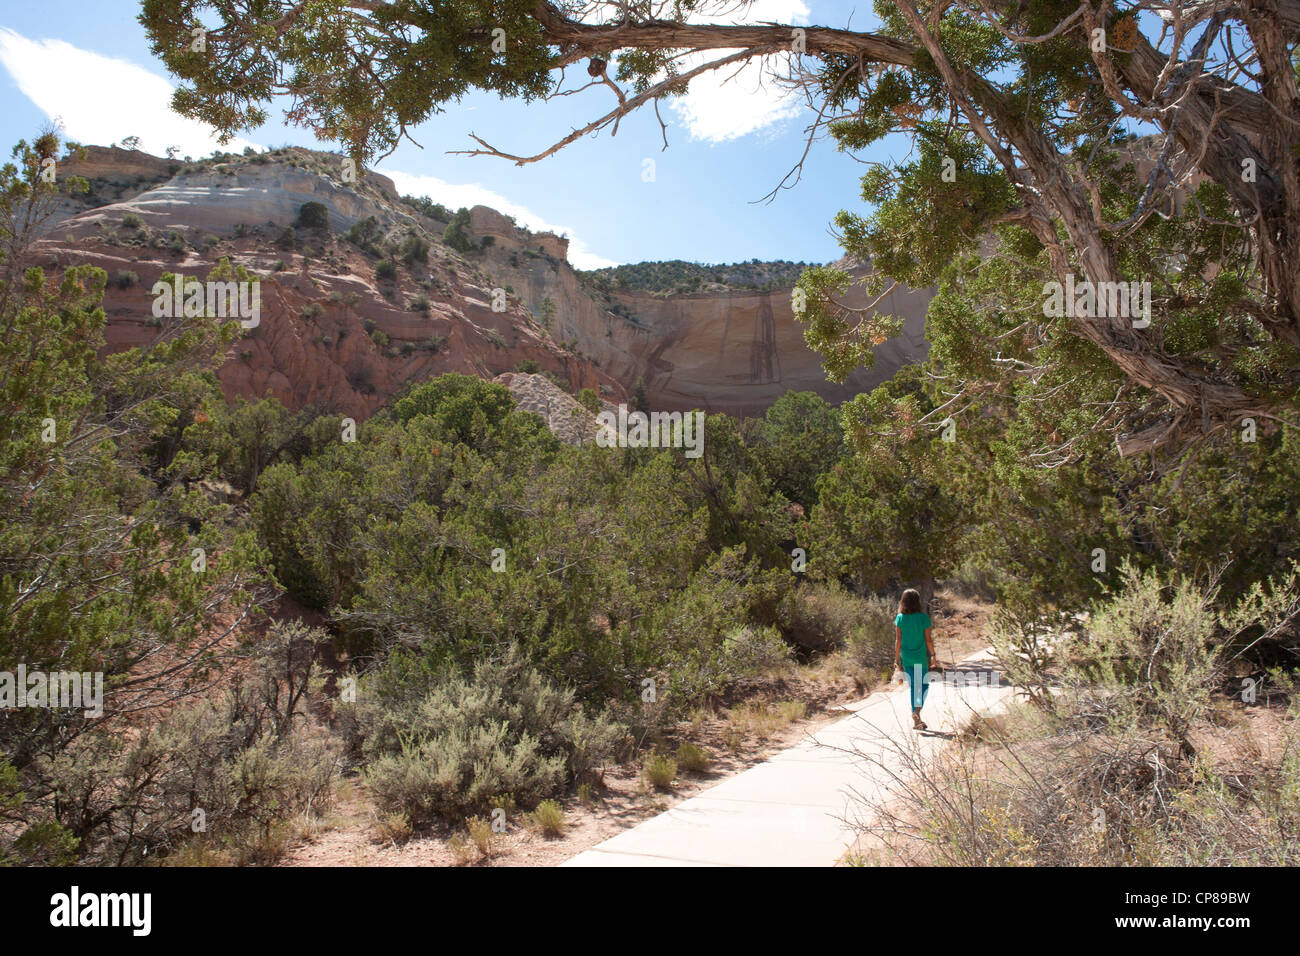 Child taking a walk near a canyon in Southern Colorado. Stock Photo